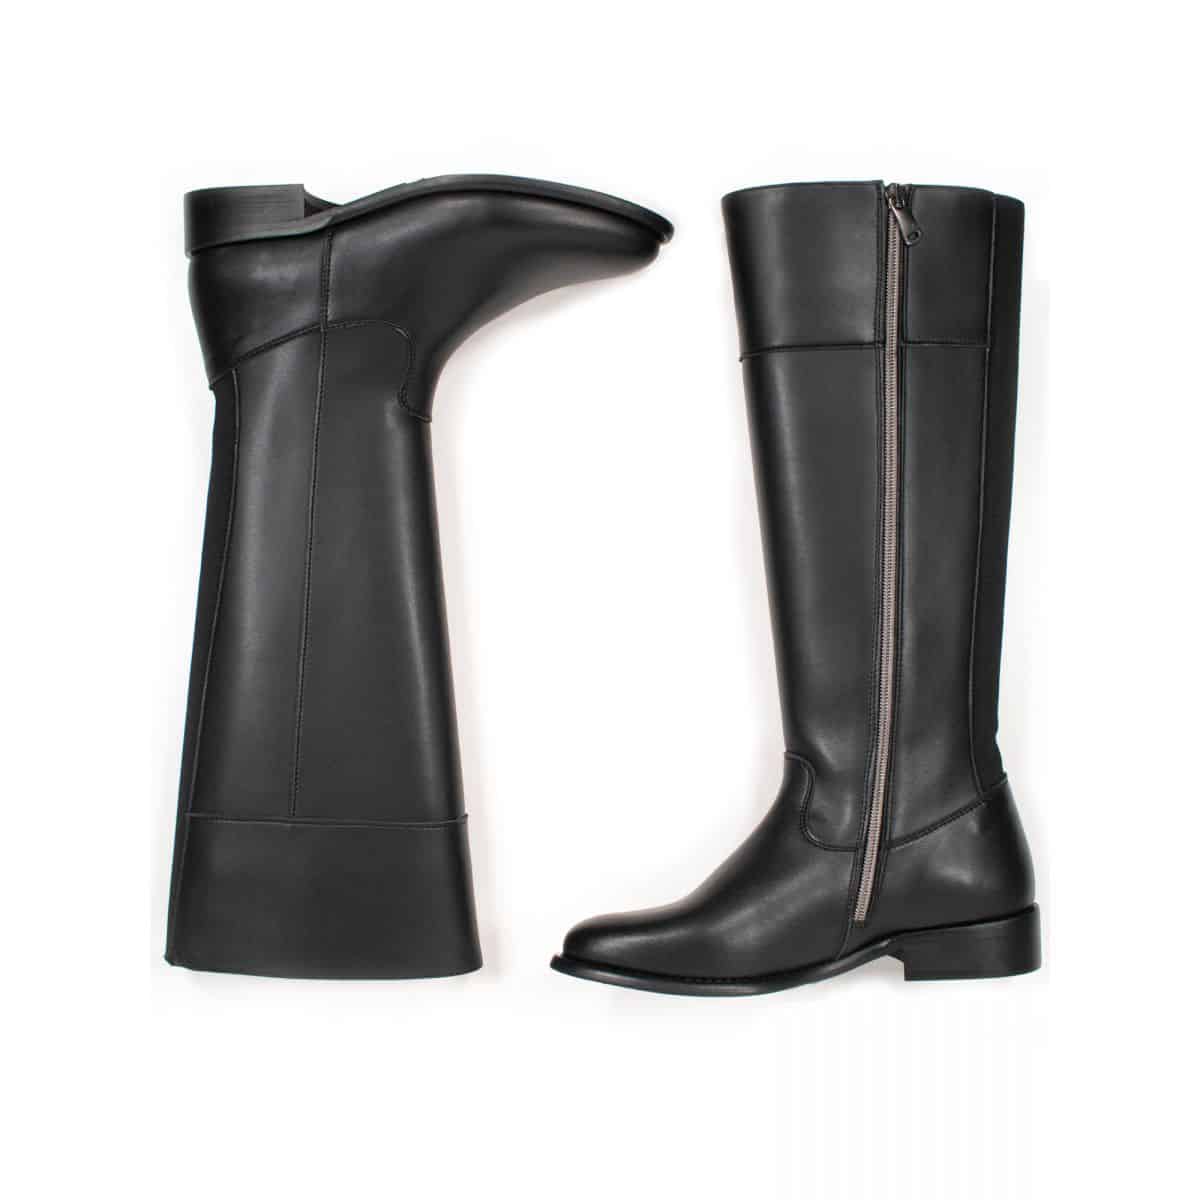 Flat black vegan leather knee high boots with full length zip